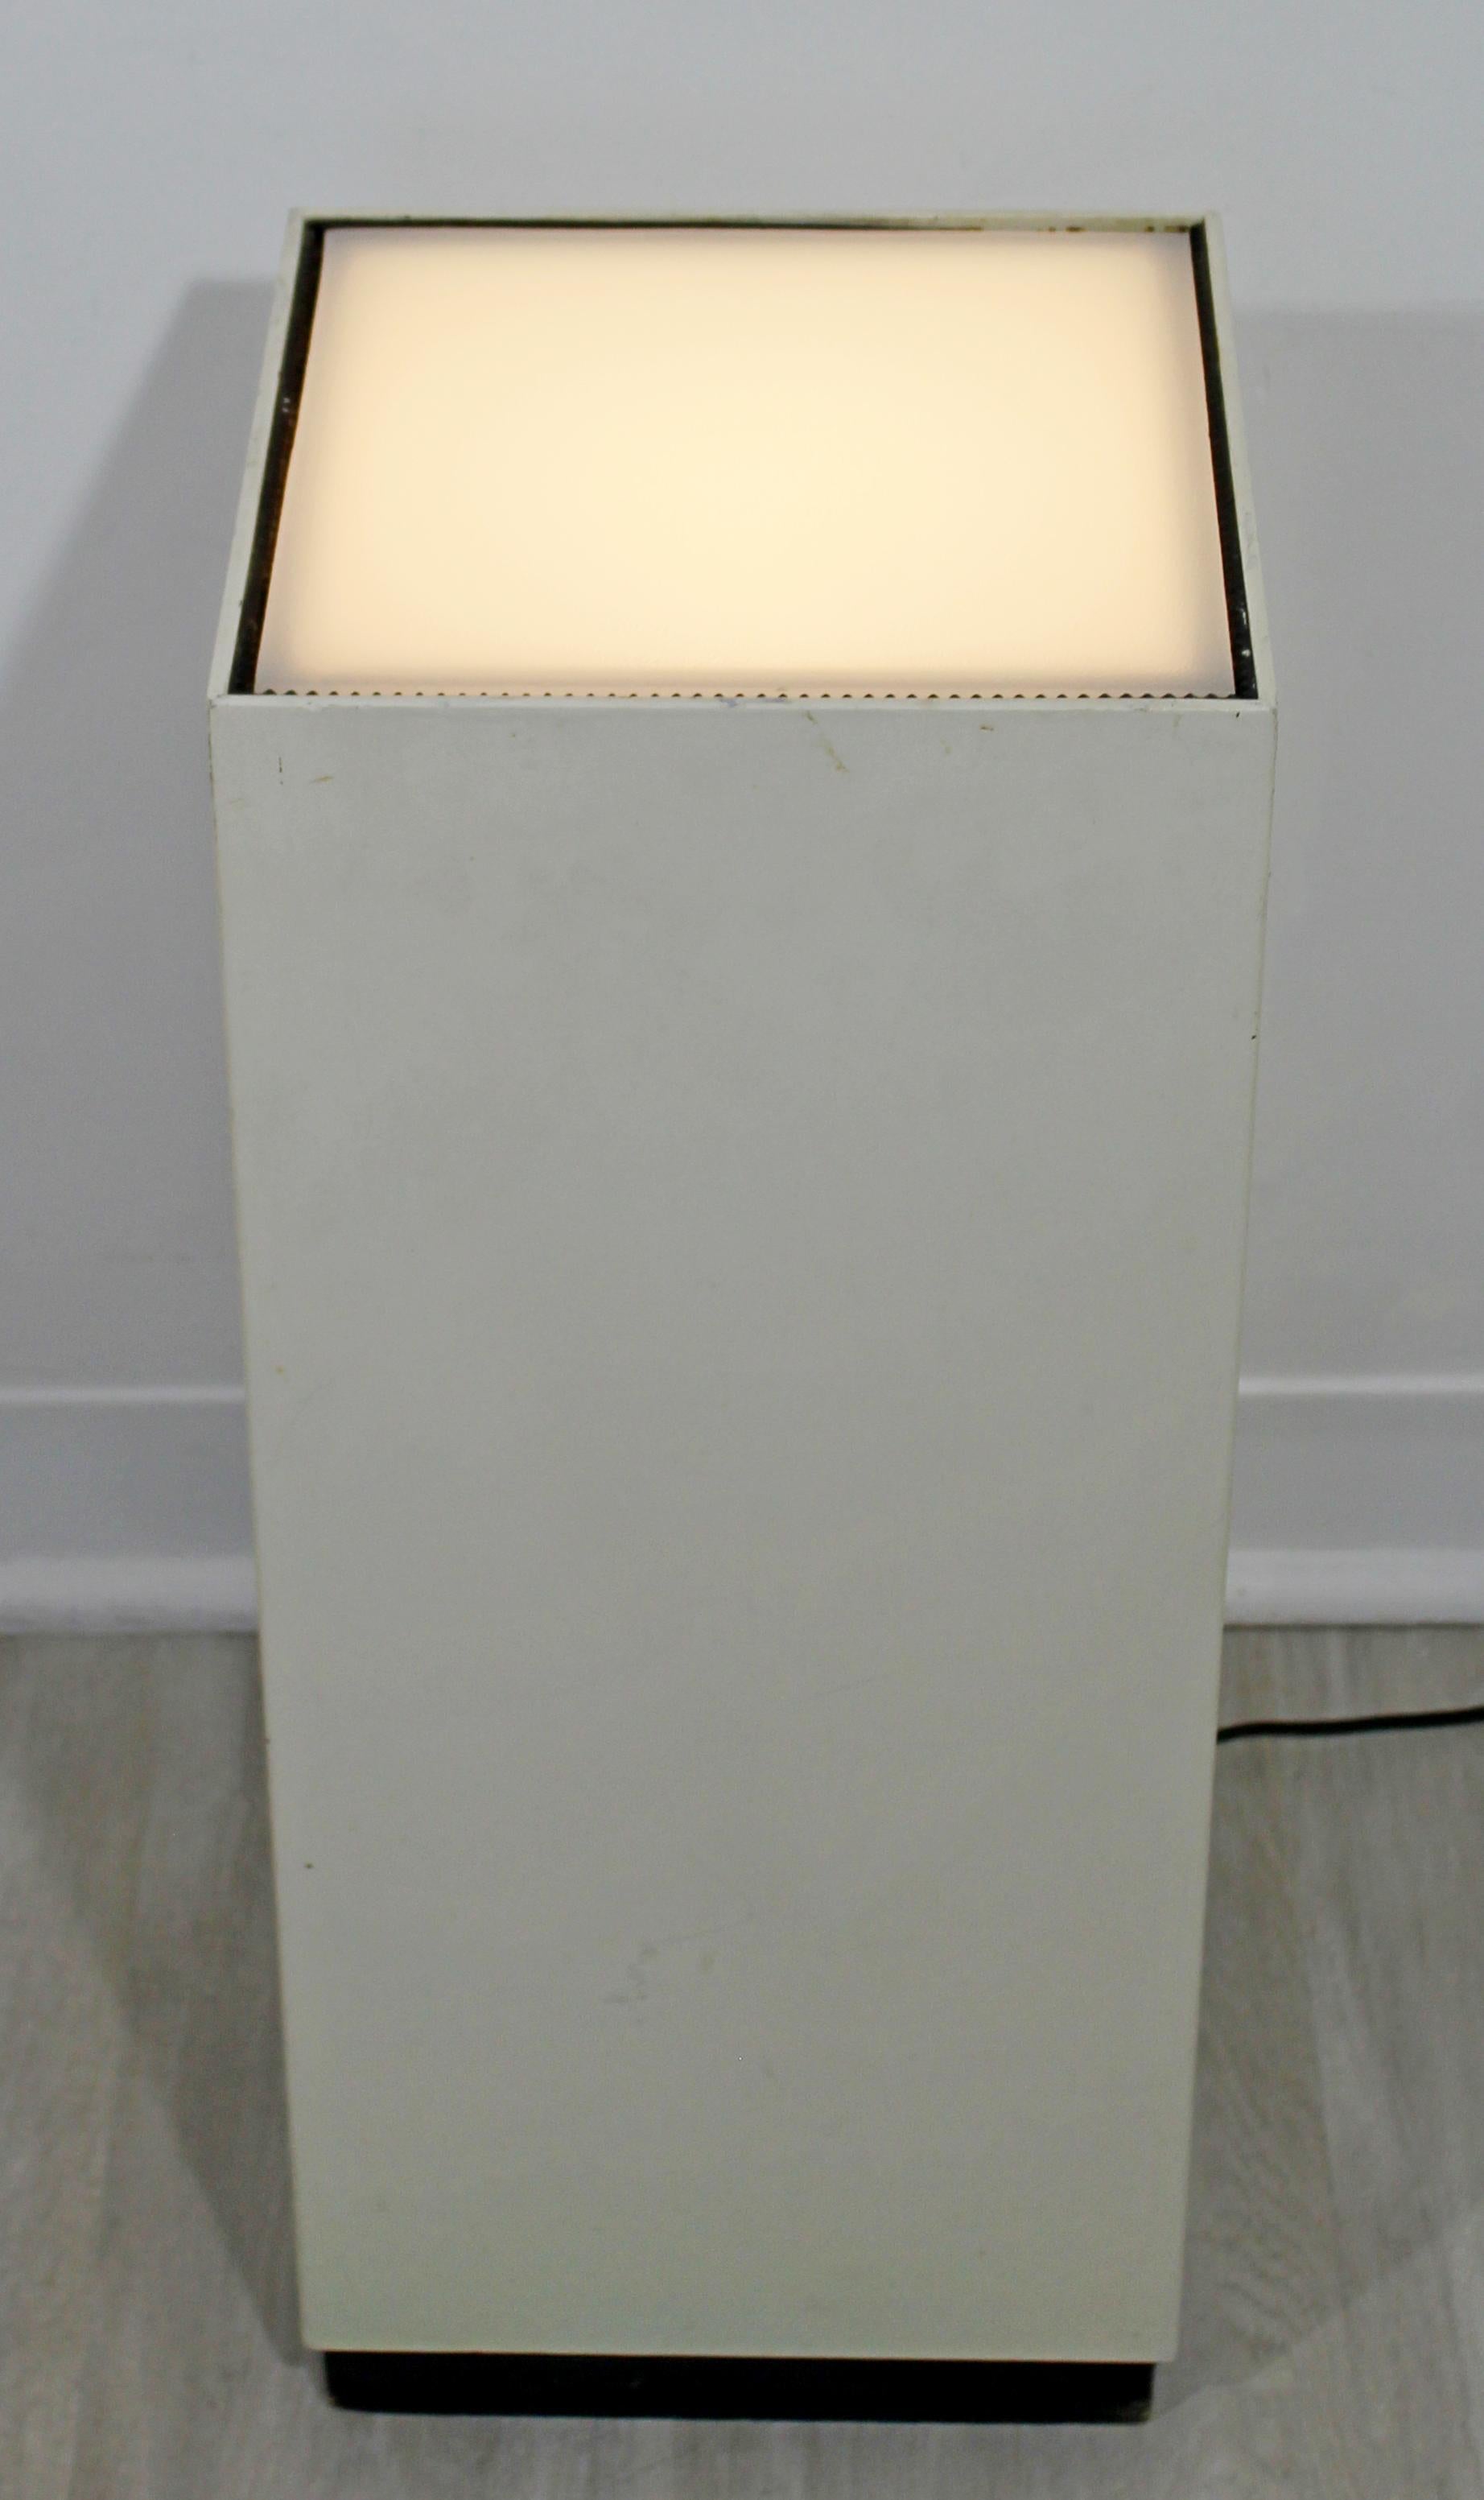 For your consideration is a short, square, light up display pedestal, circa 1980s. In good vintage condition. The dimensions are 10